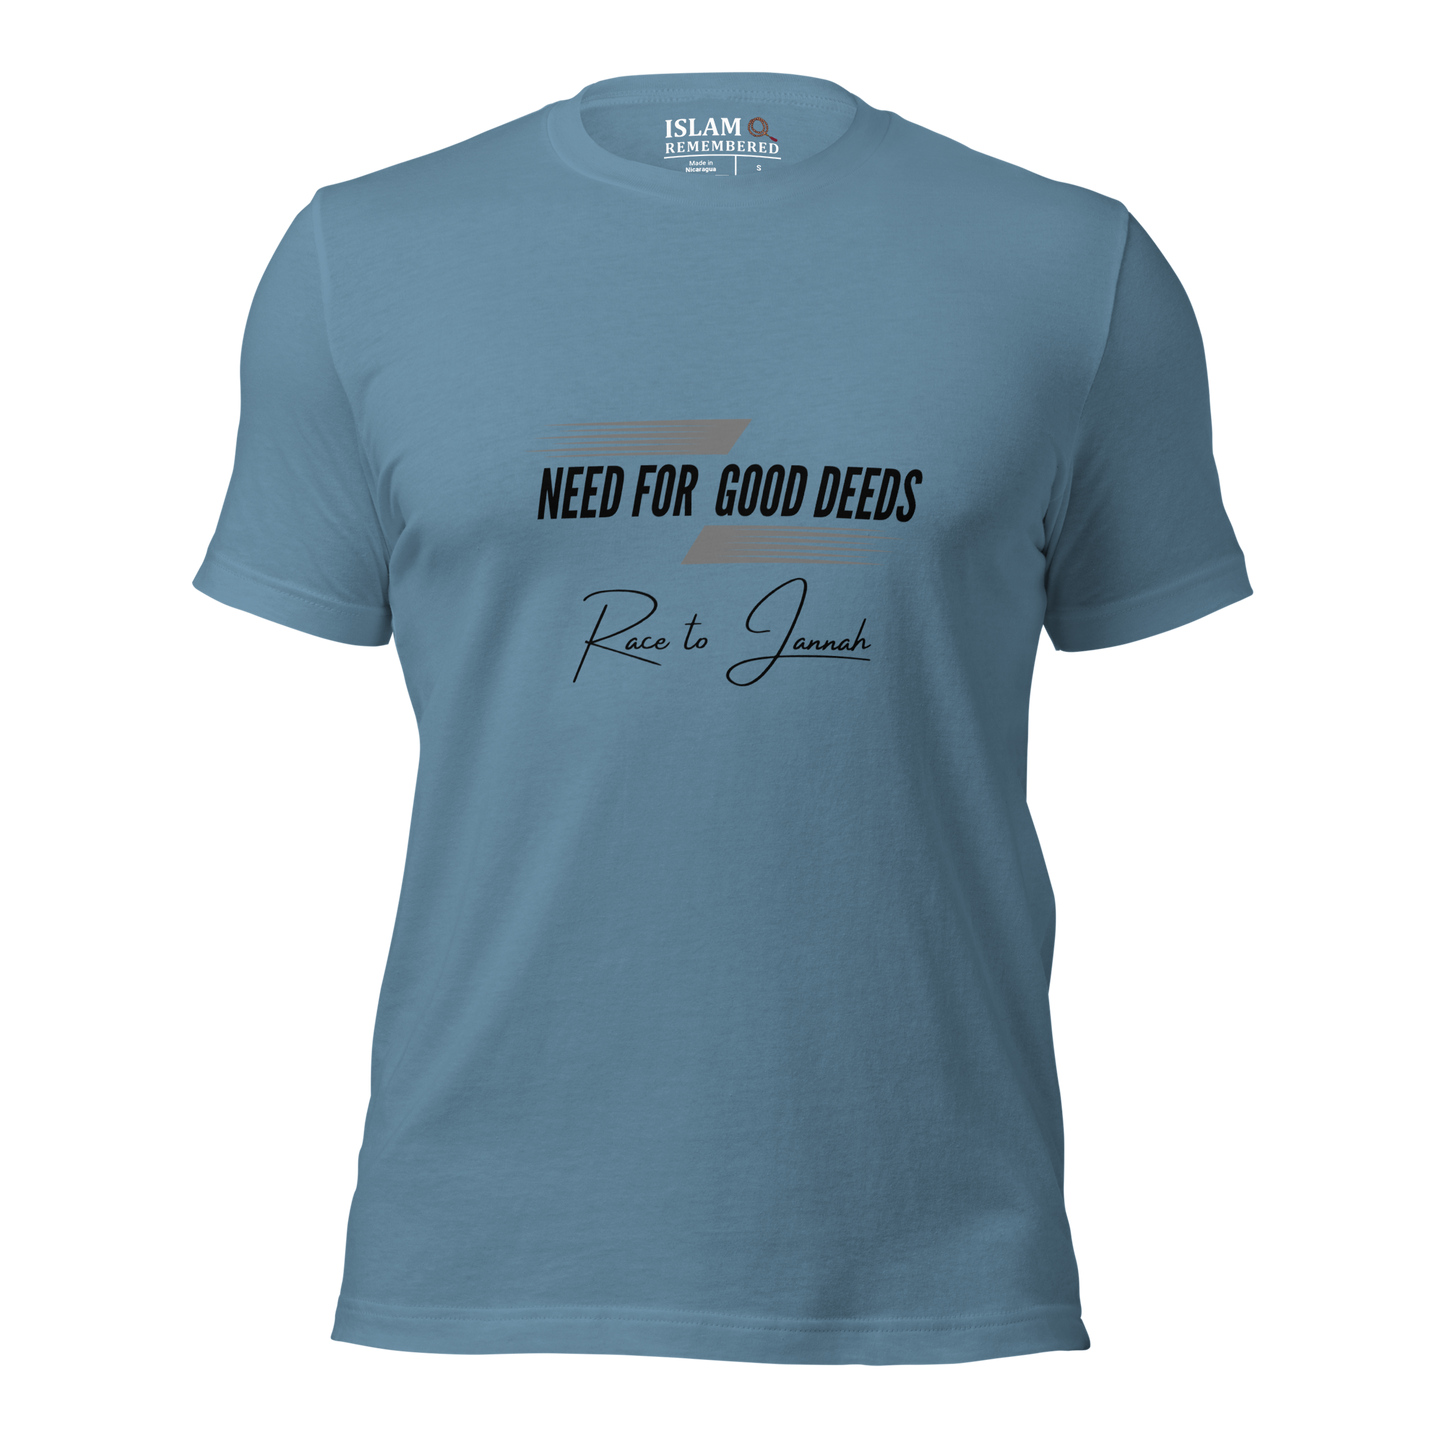 ADULT T-Shirt - NEED FOR GOOD DEEDS - Black/Gray